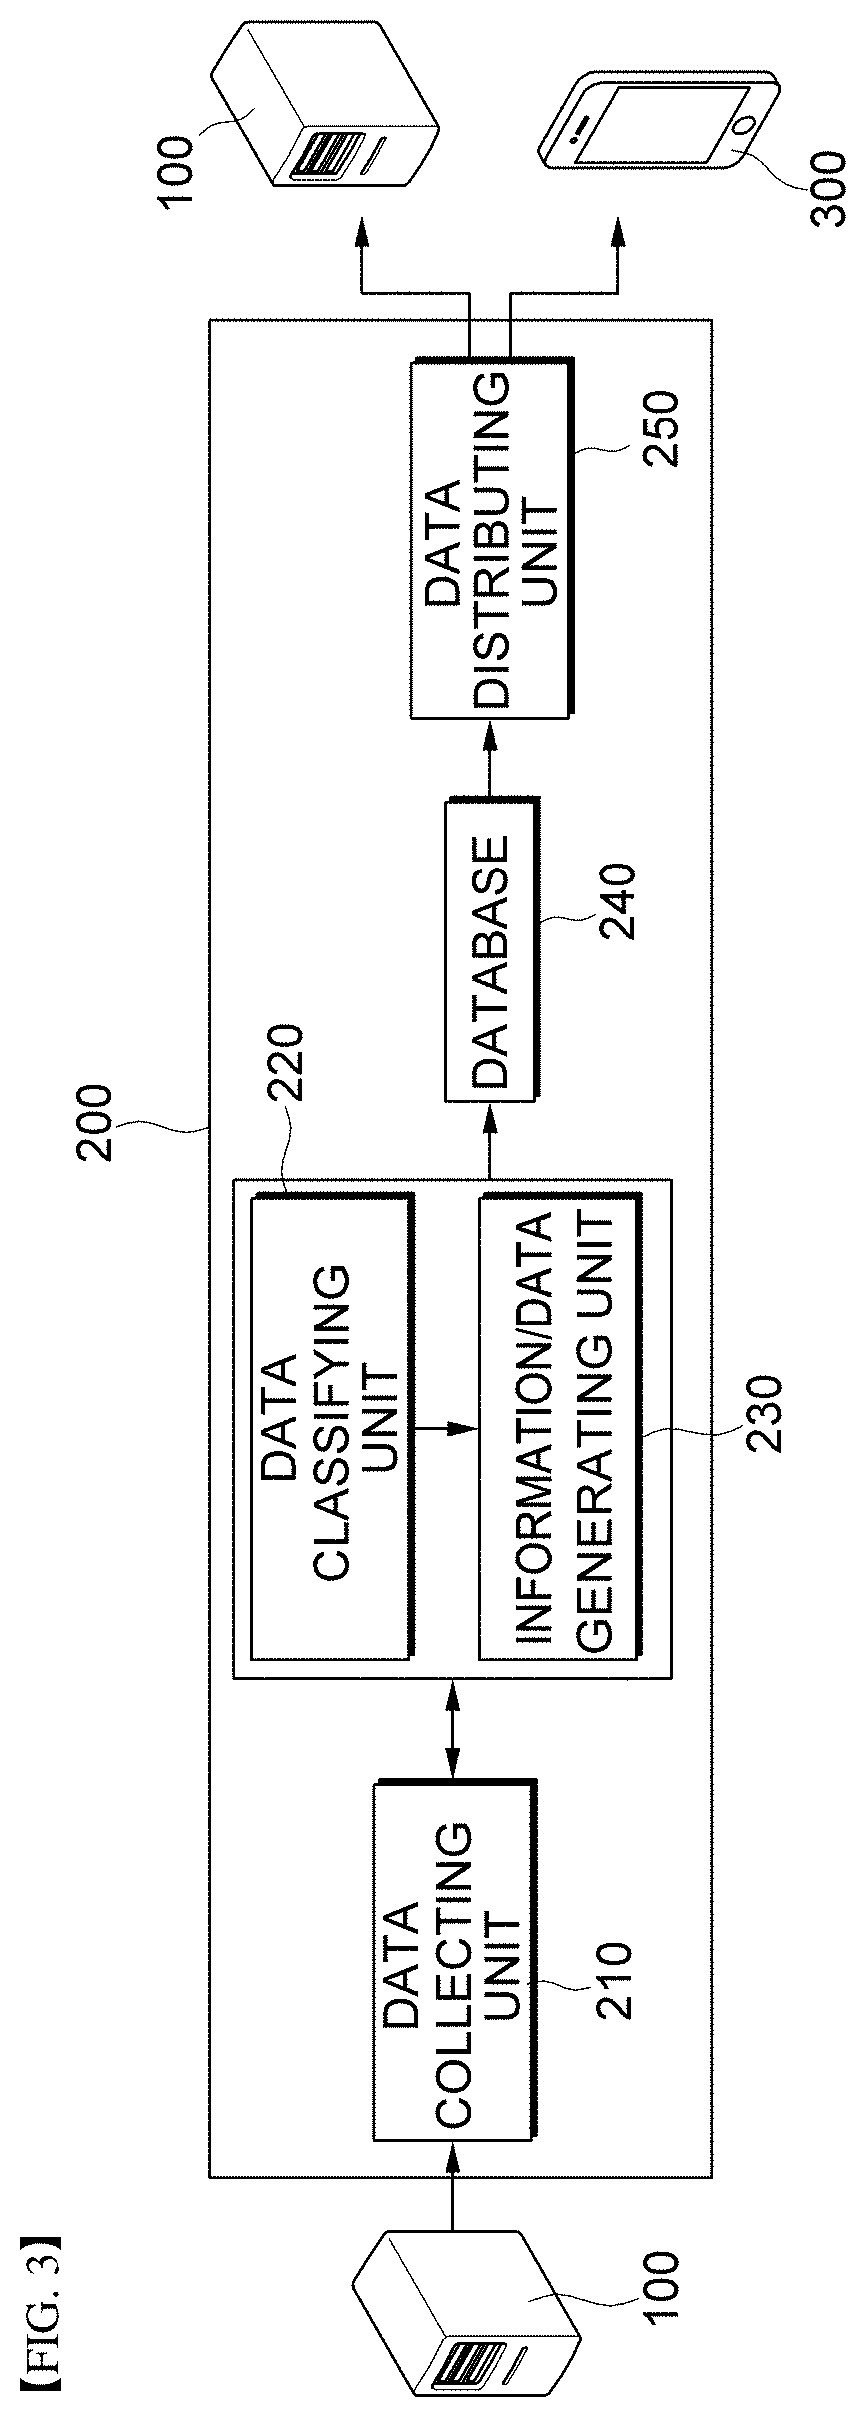 Method and system for automatically classifying images